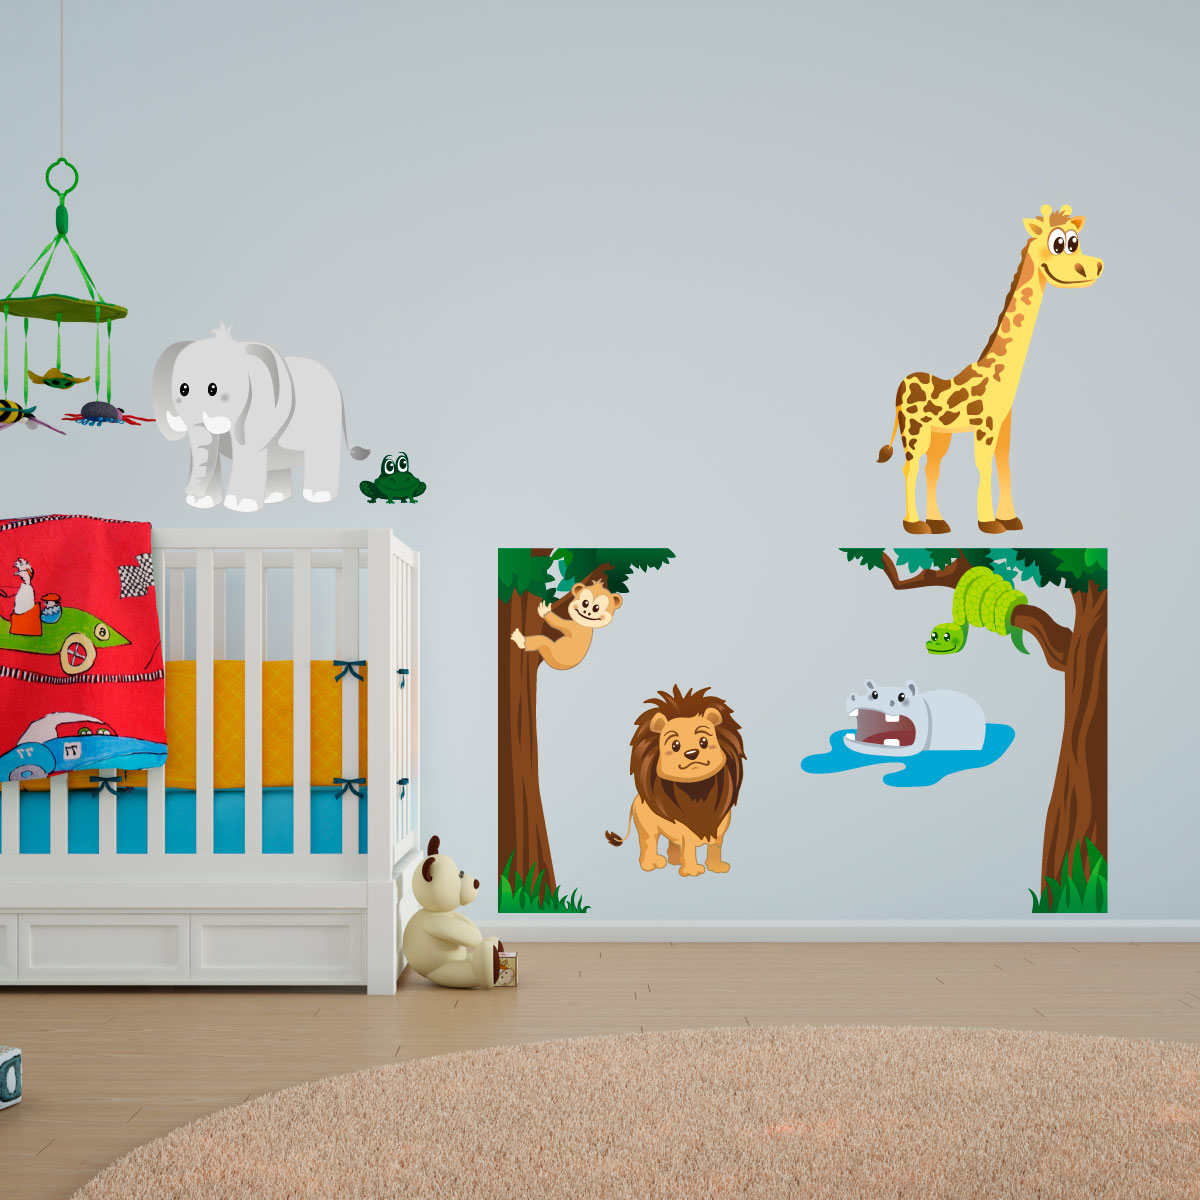 The frog among the animals of the jungle Wall sticker